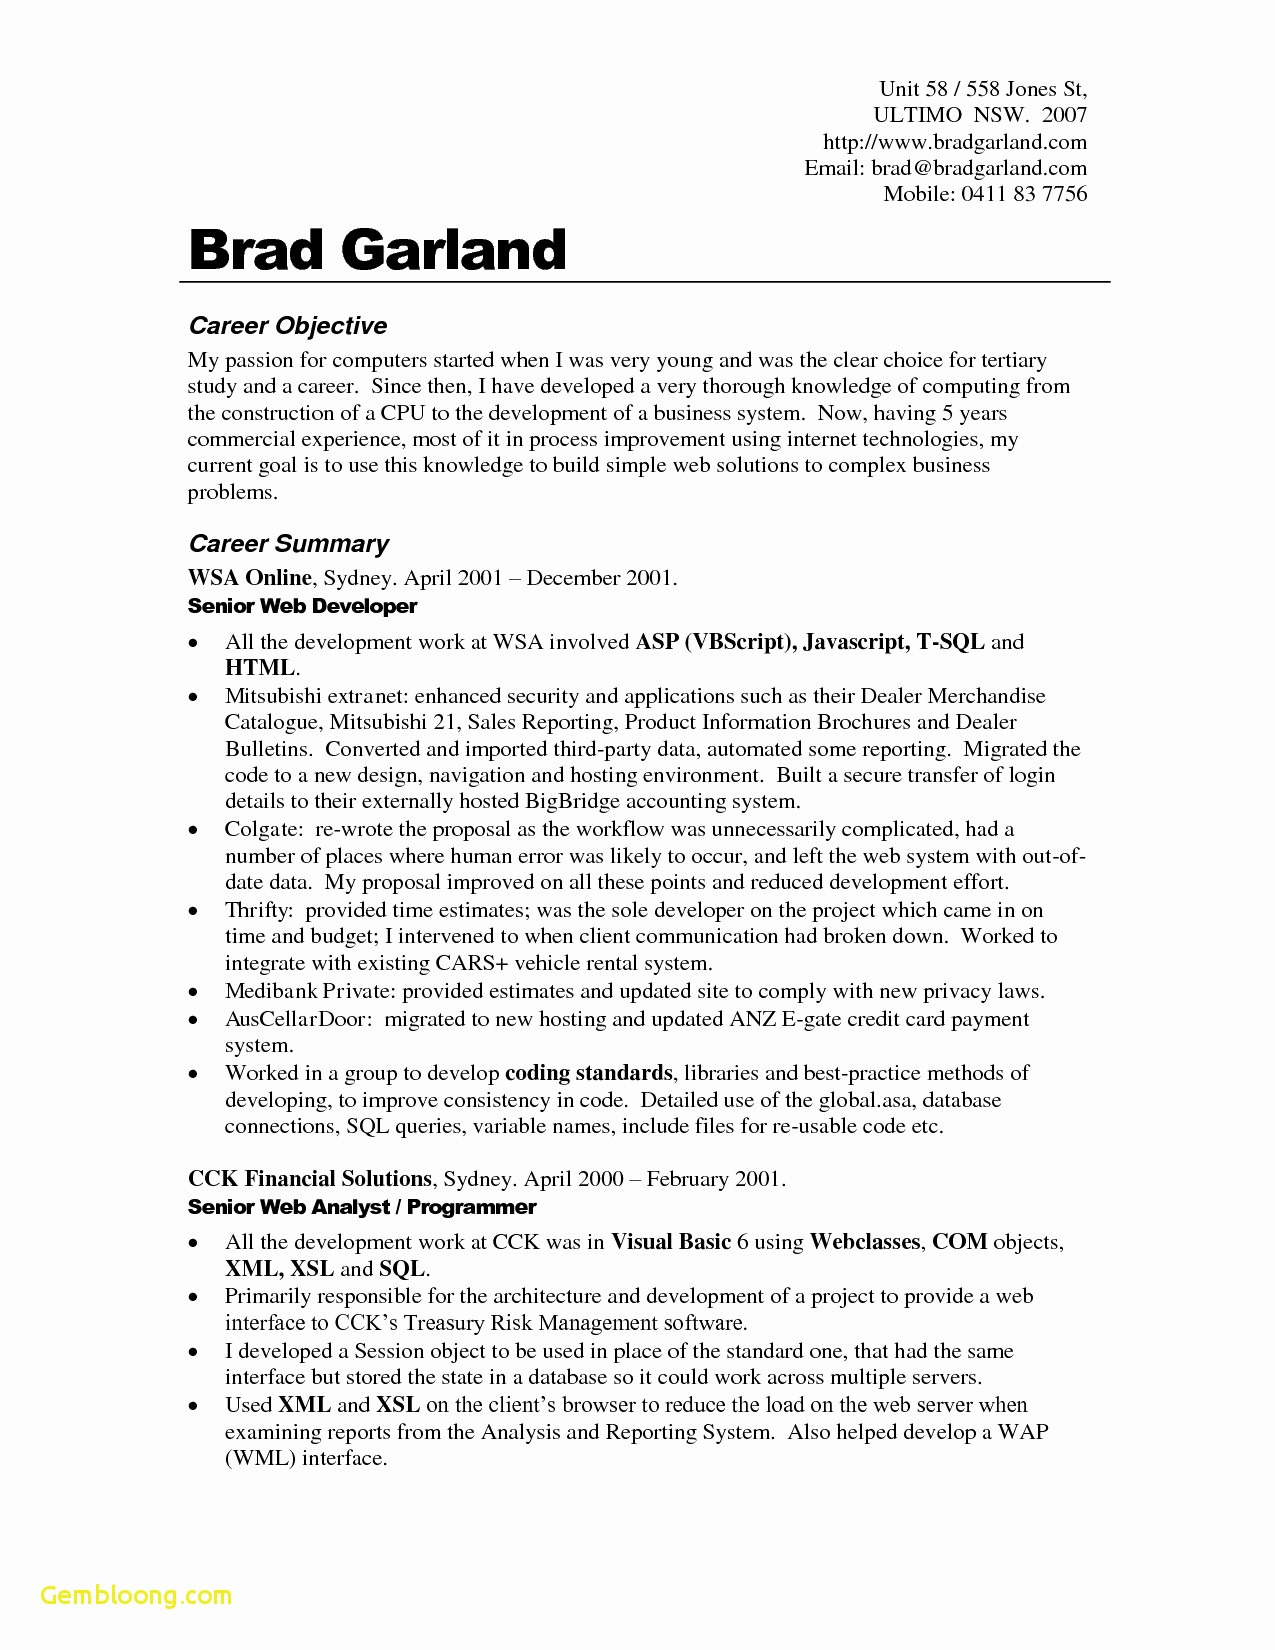 Resume Cover Letter Template Download - Free Resume Cover Letter Template Download Luxury Modern Free Resume